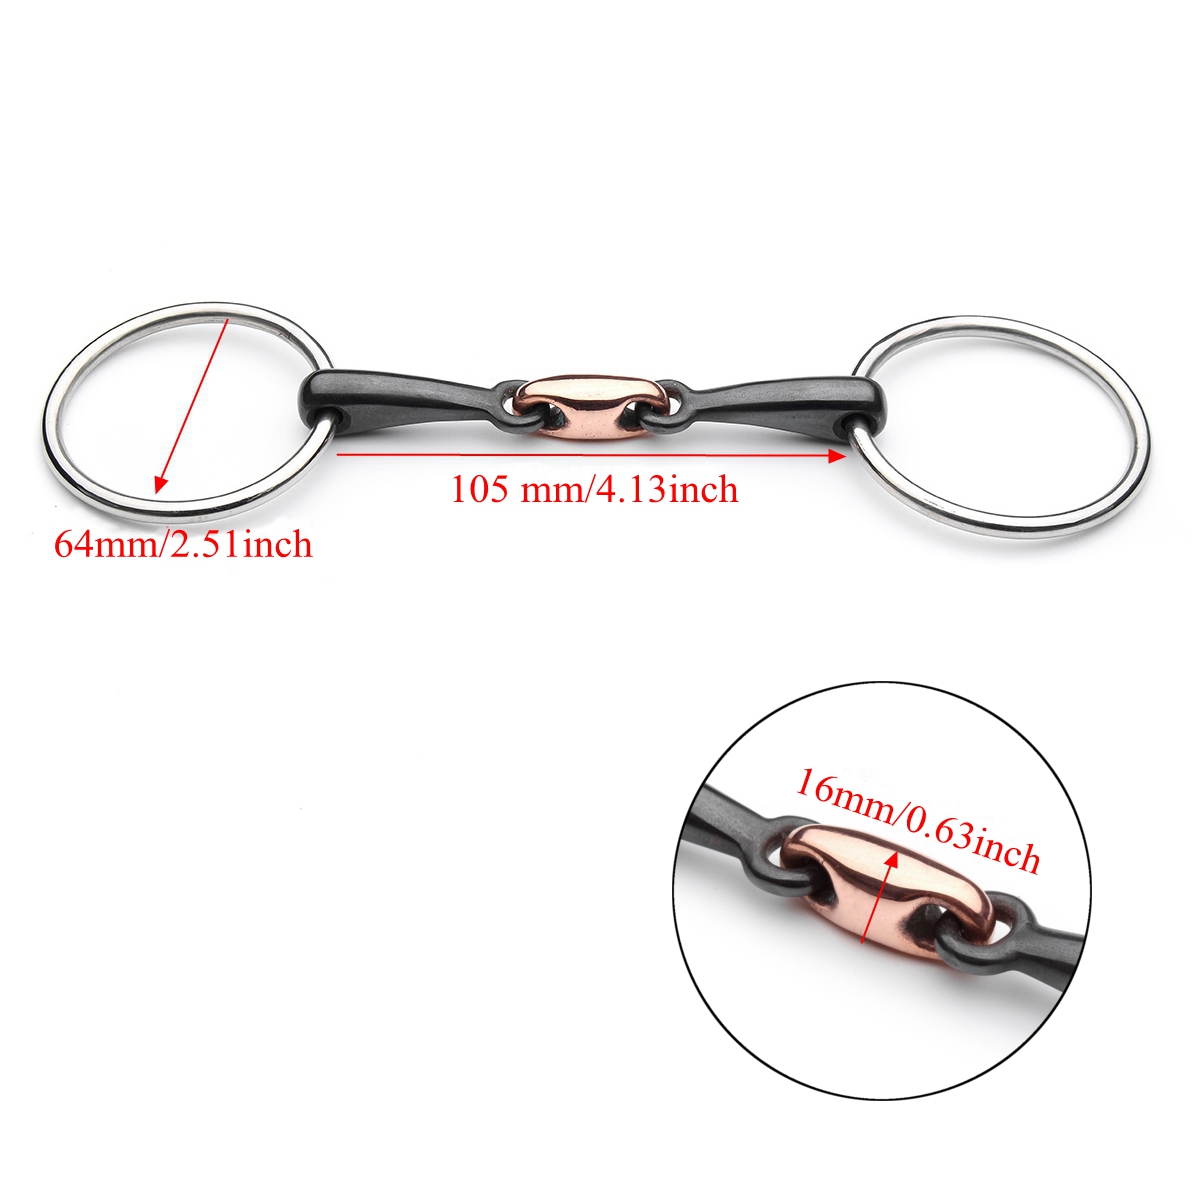 Equestrian-Loose-Ring-Horse-Snaffle-Bit-D-Ring-Stainless-Steel-Copper-Roller-1245582